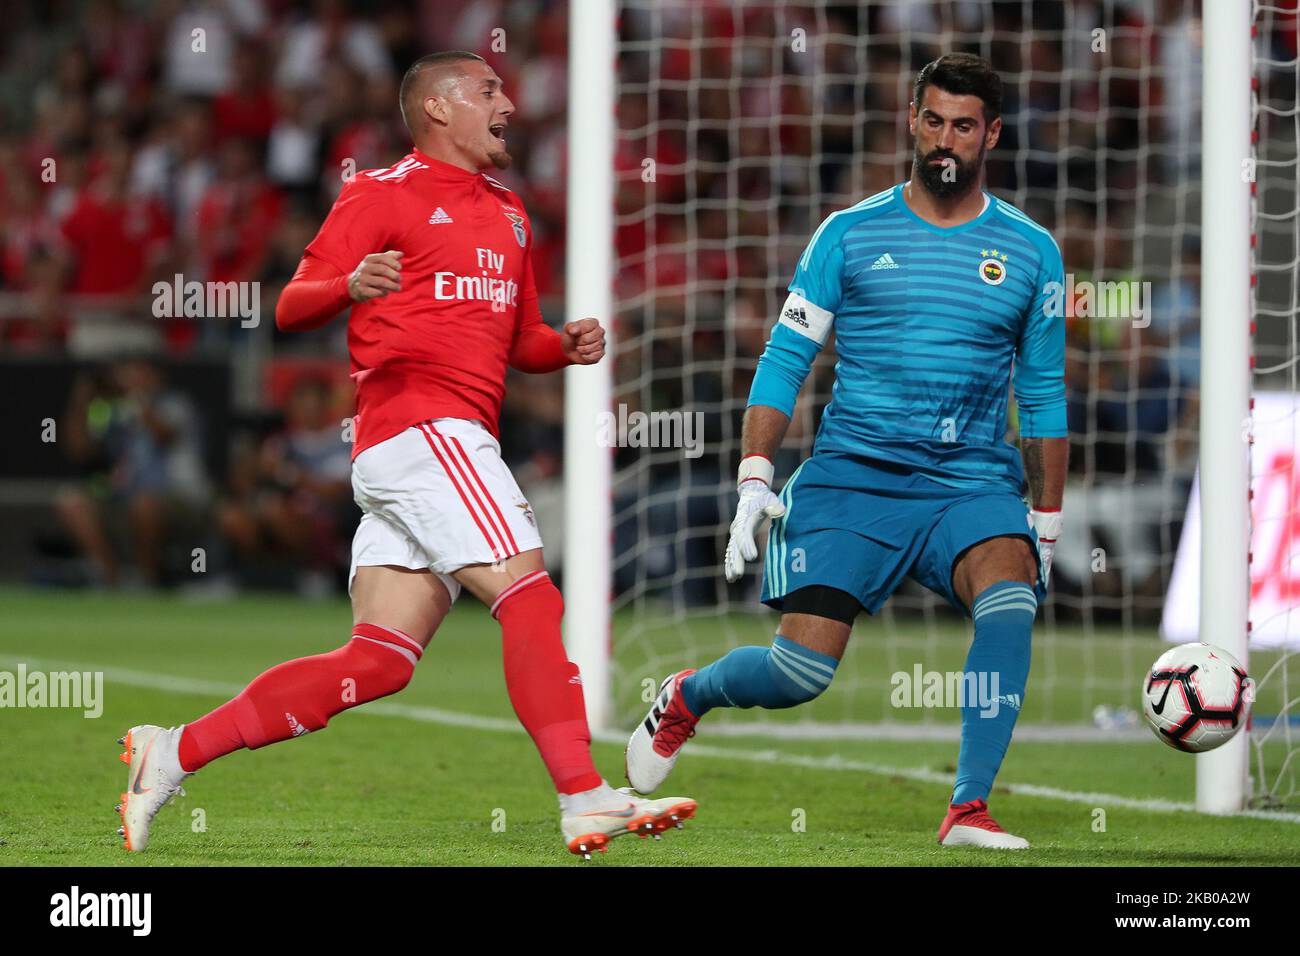 Benfica's forward Nicolas Castillo of Chile vies with Fenerbahce's goalkeeper Volkan Demirel during the UEFA Champions League 3rd Qualifying Round first leg match Benfica vs Fenerbahce at the Luz Stadium in Lisbon, Portugal on August 7, 2018. ( Photo by Pedro FiÃºza/NurPhoto) Stock Photo